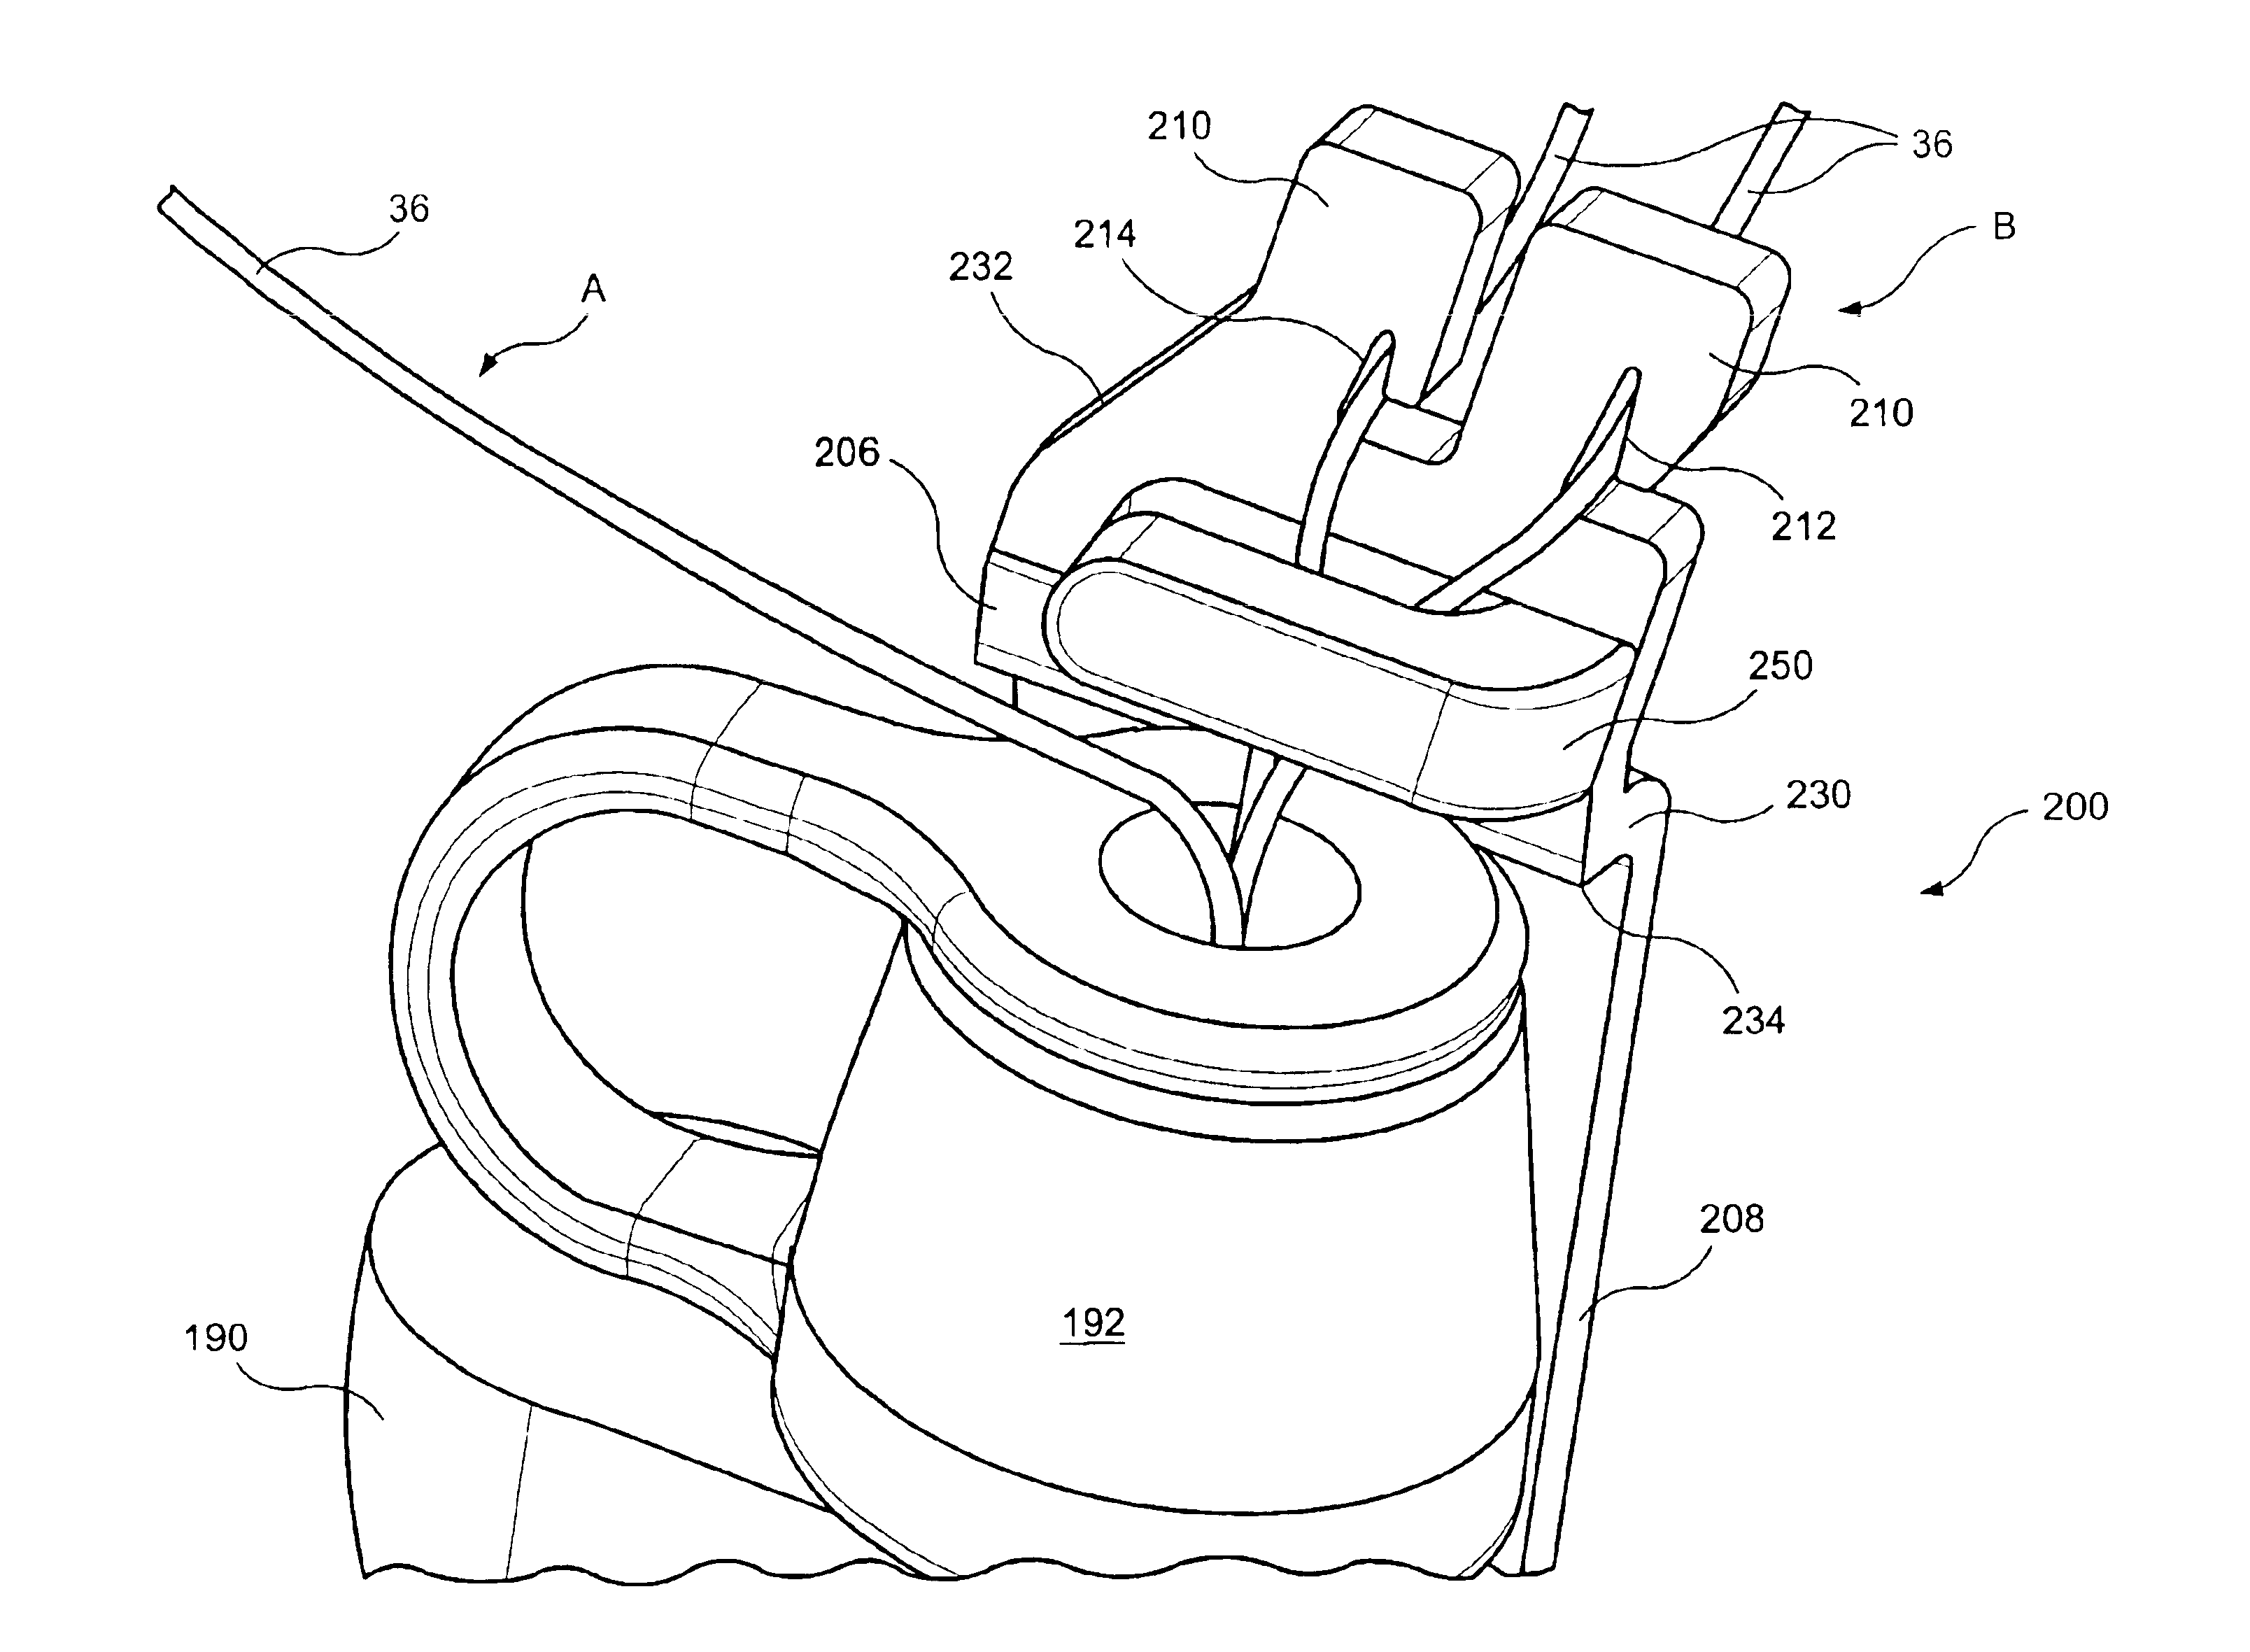 Guidewire locking device and method